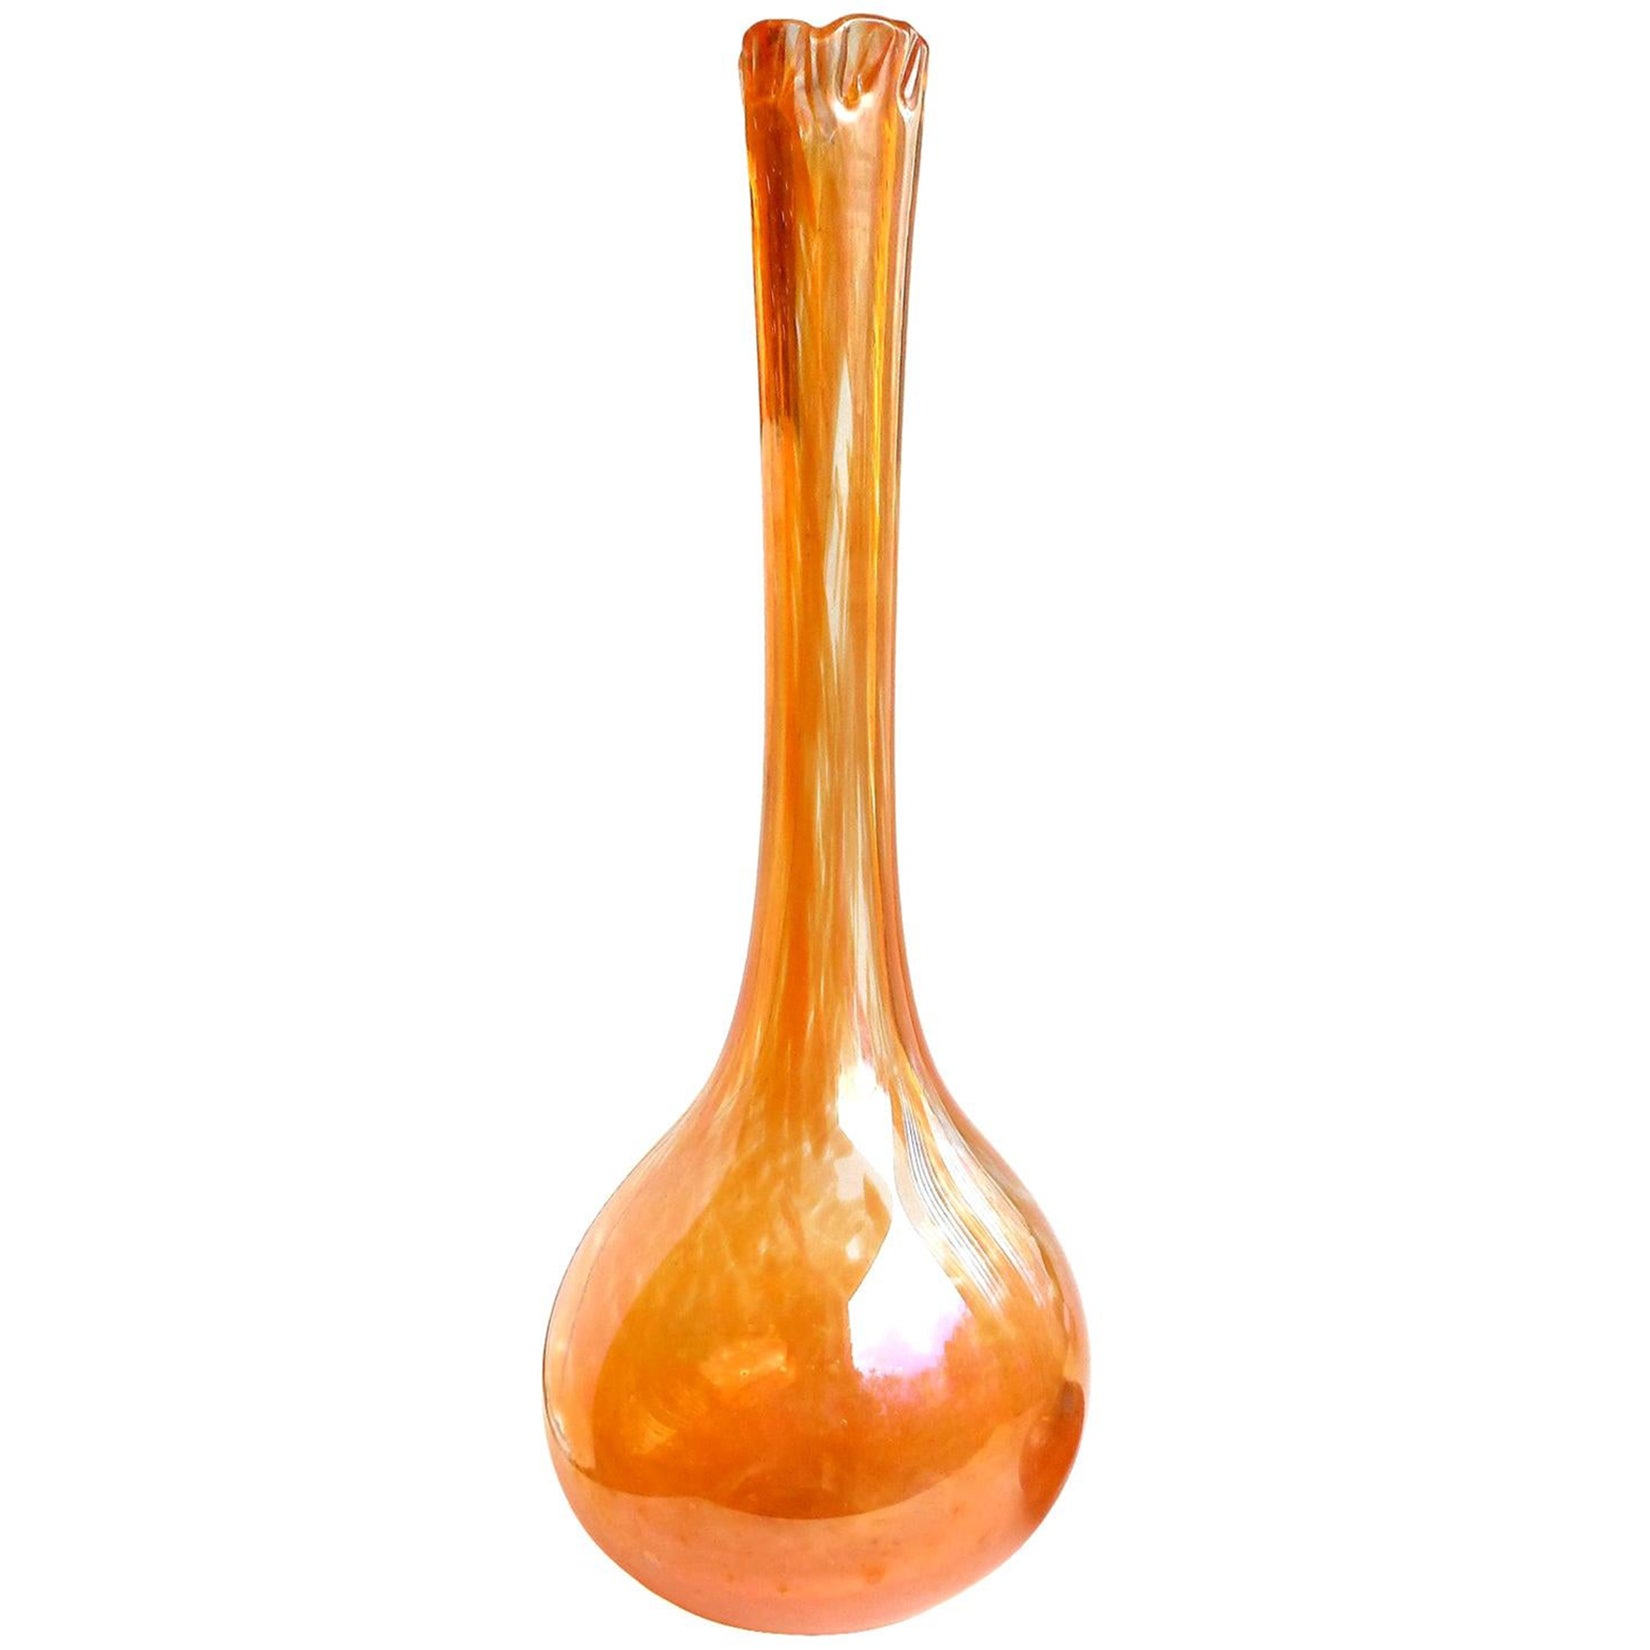 Collectibles Vintage Orange Hand Blown Glass Vase With Silver Detailing Art And Collectibles